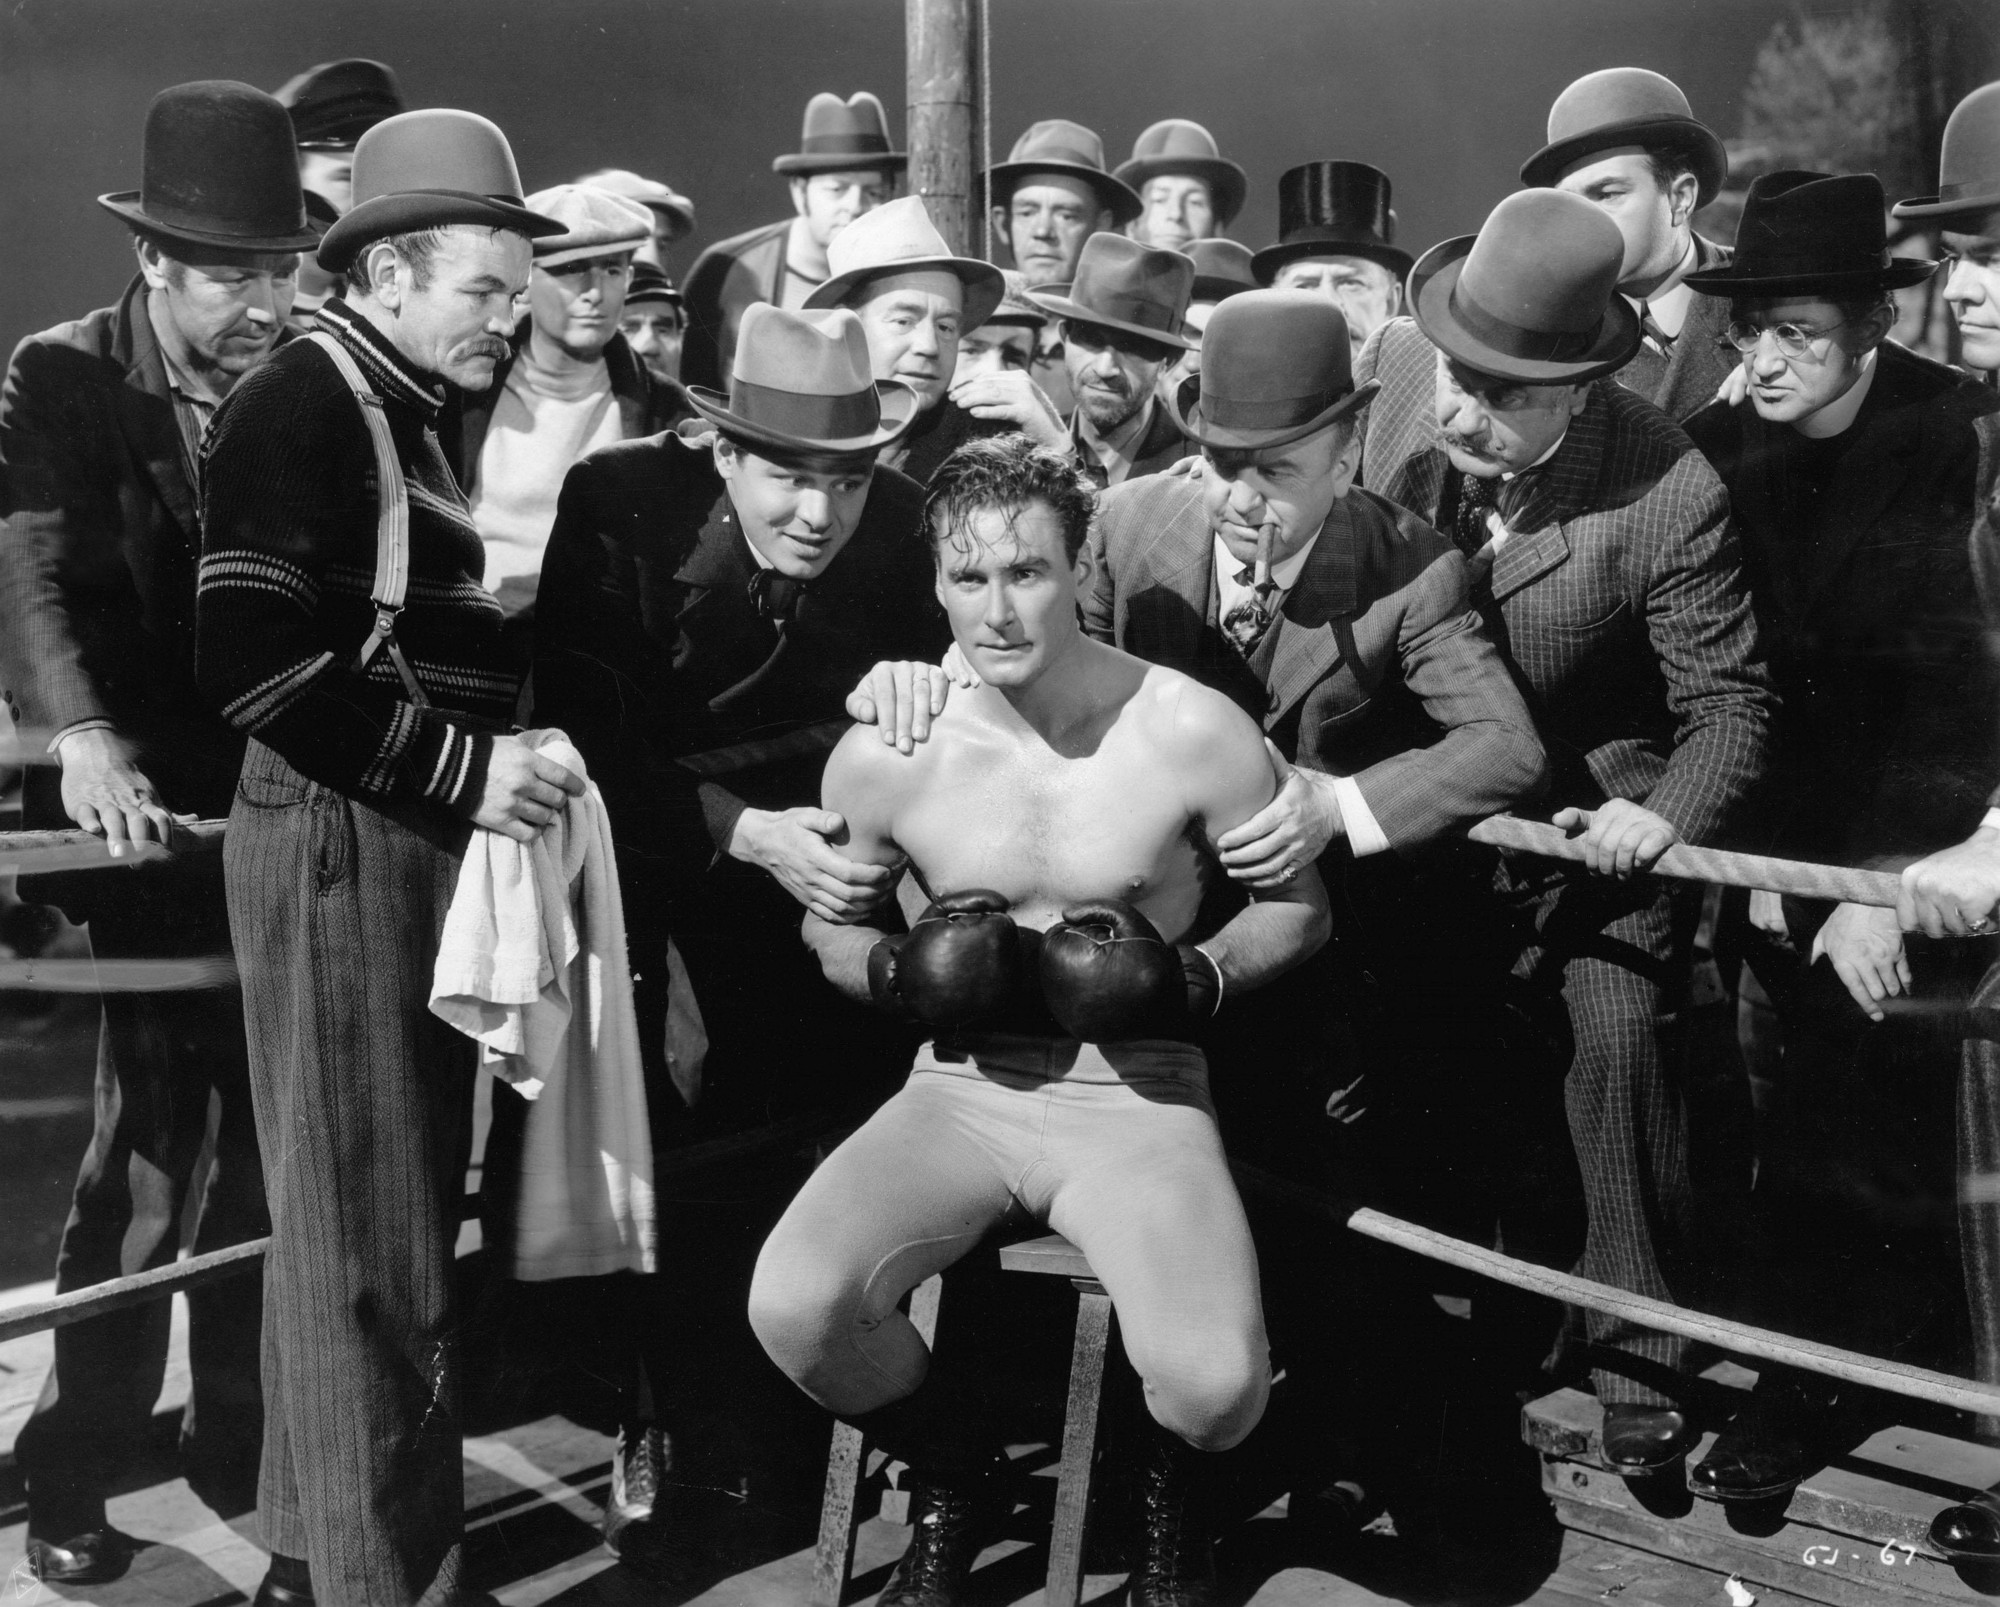 Gentleman Jim. 1940. Directed by Raoul Walsh | MoMA